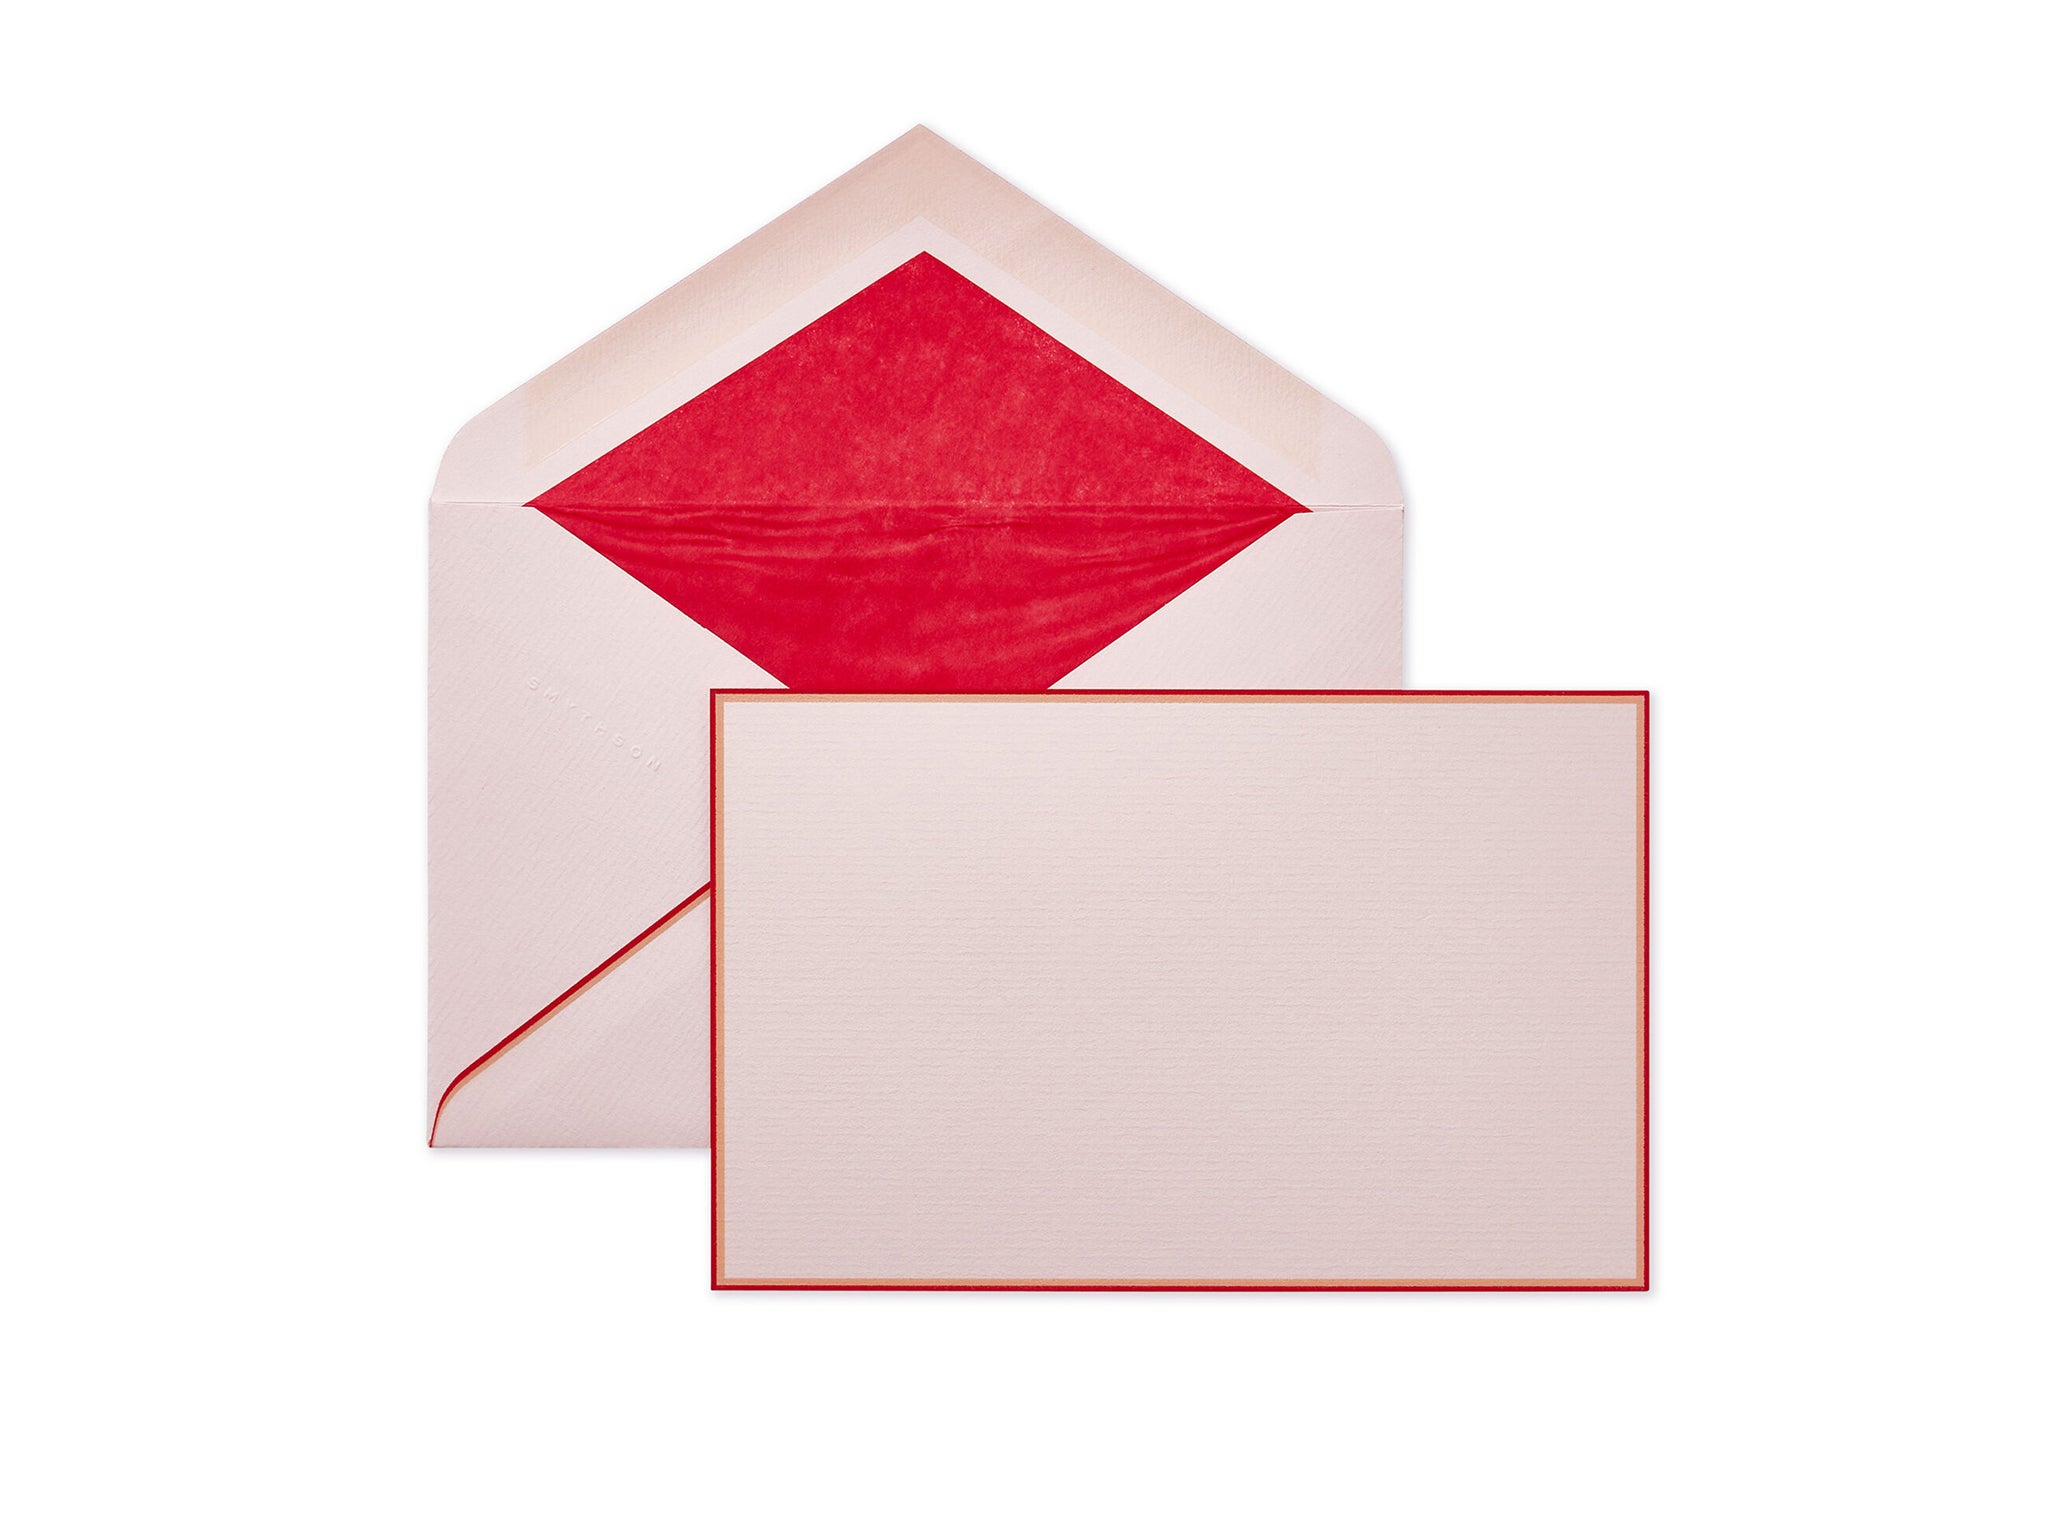 Best letter writing set for adults: Add to your stationery